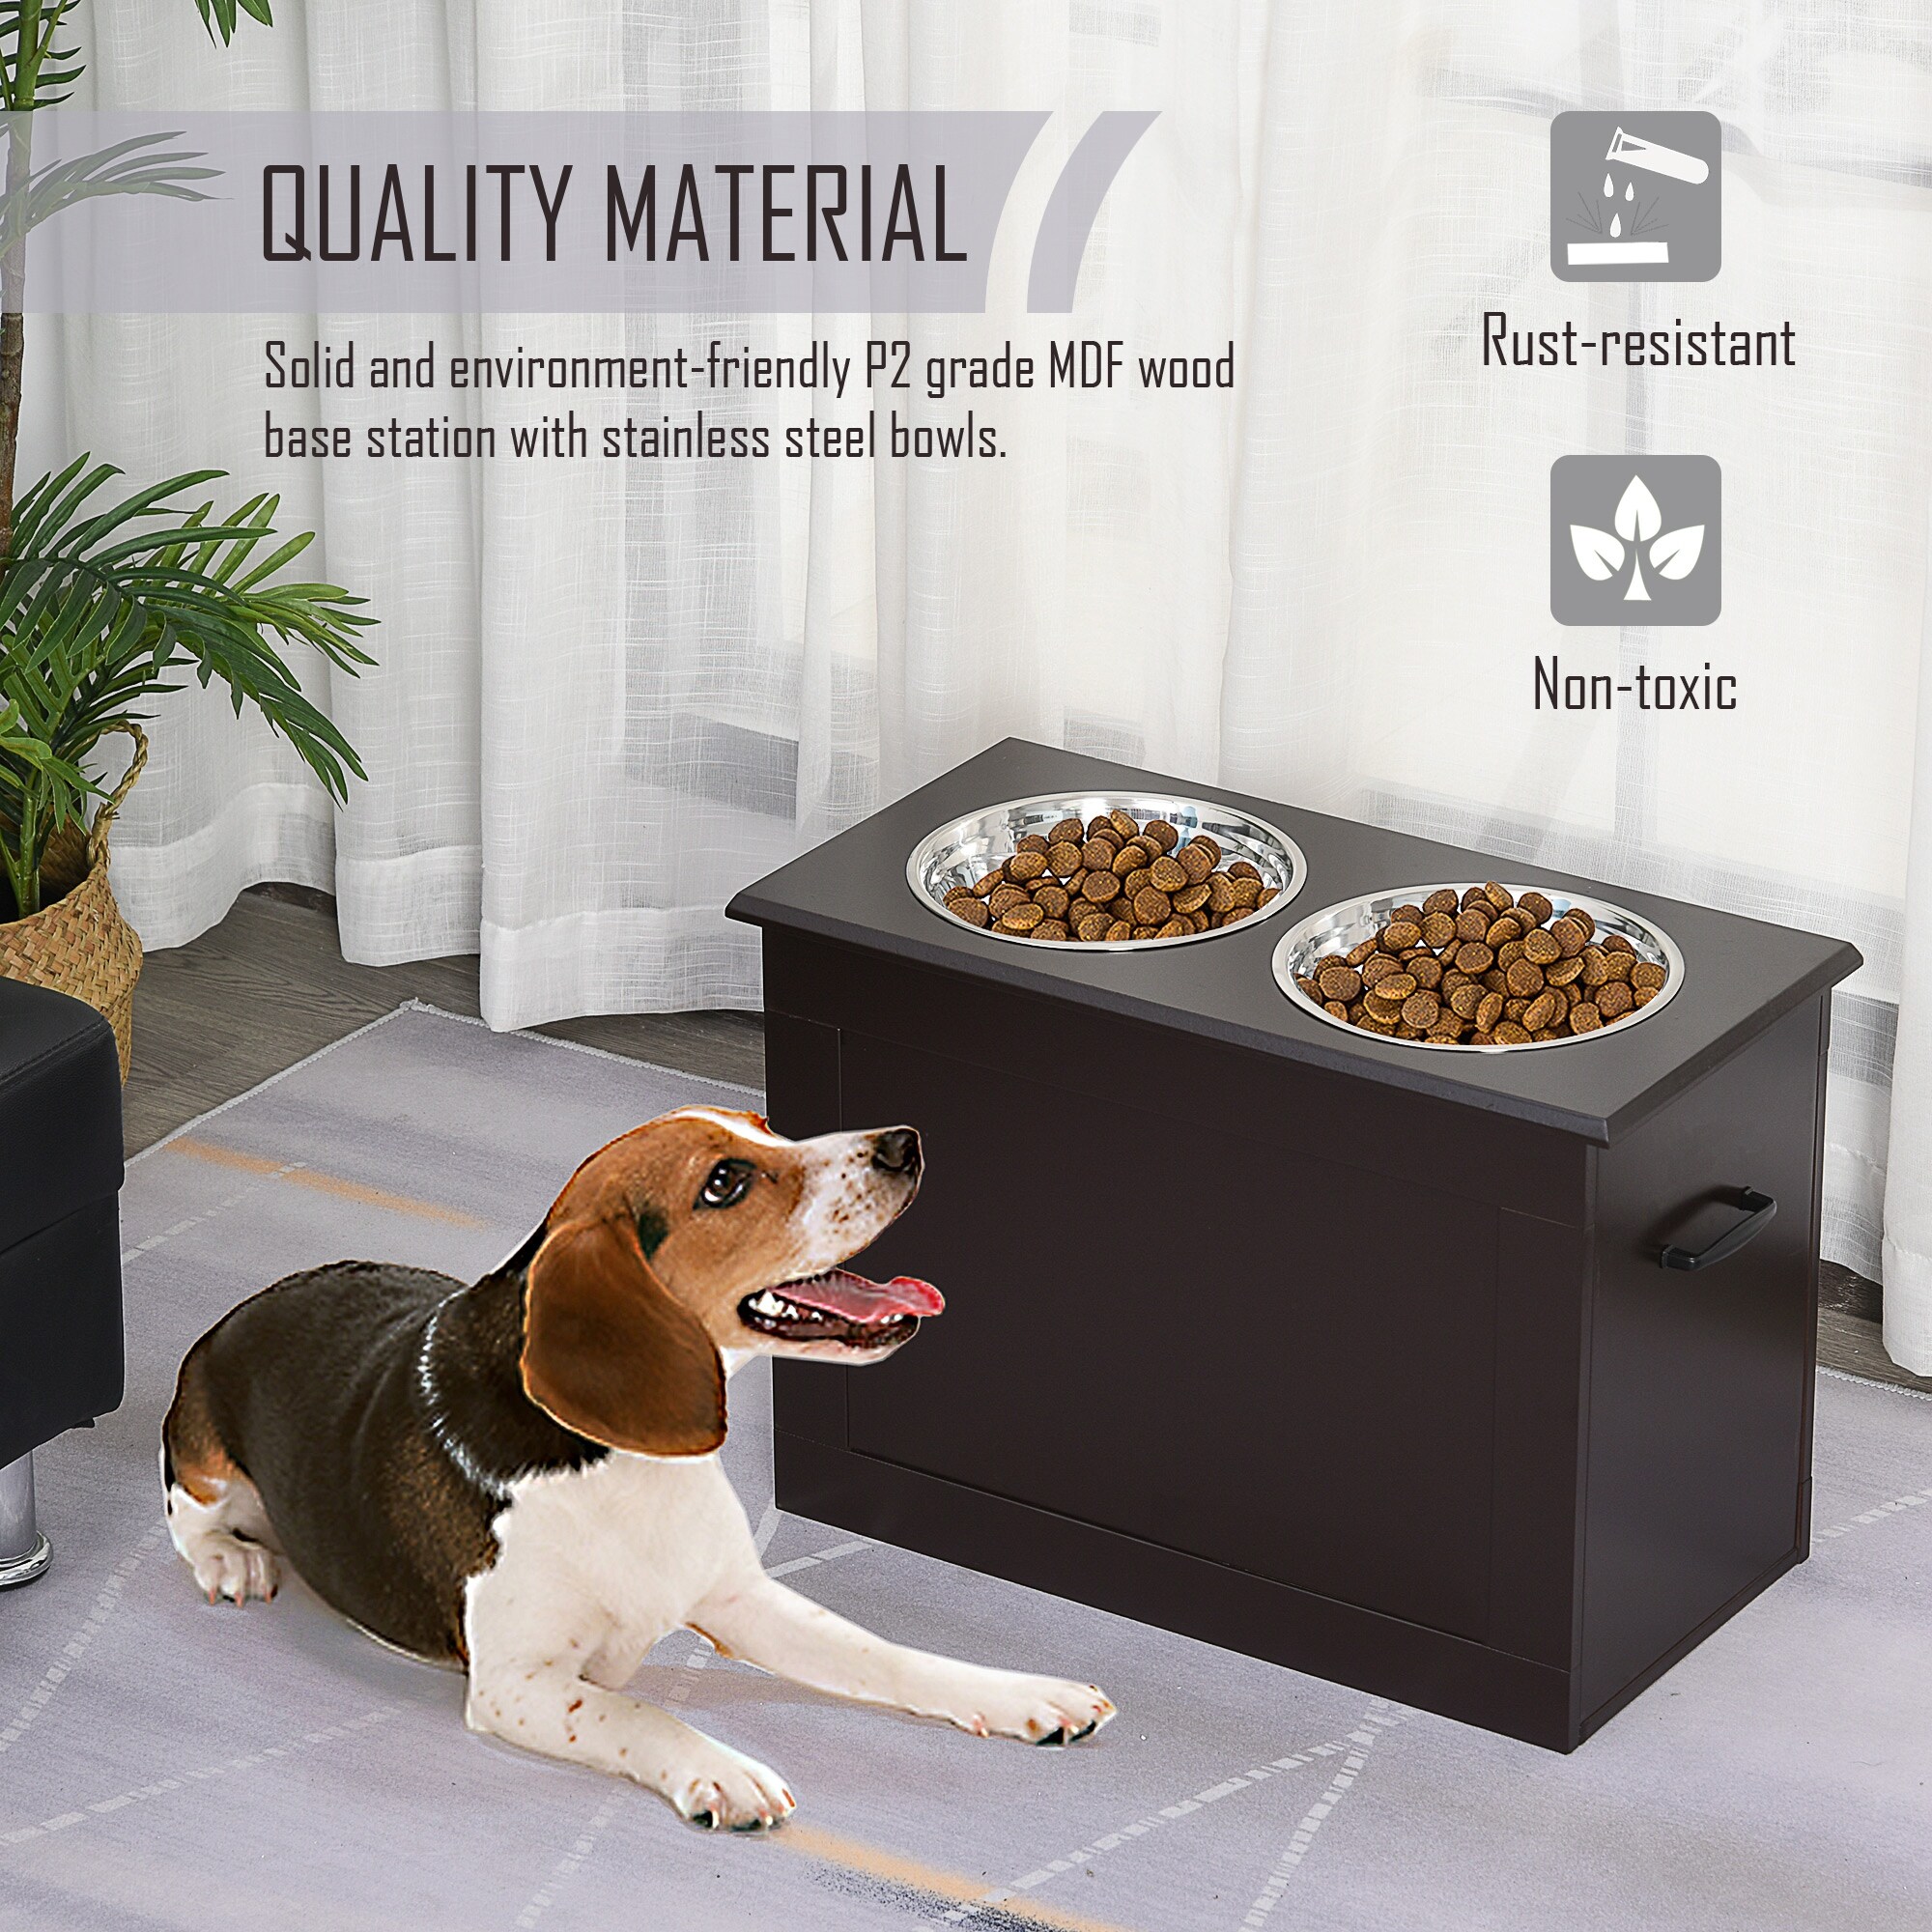 https://ak1.ostkcdn.com/images/products/is/images/direct/41f4959c28bc8cce480e4990cd47926ed609d3bc/PawHut-Raised-Pet-Feeding-Storage-Station-with-2-Stainless-Steel-Bowls-Base-for-Large-Dogs-and-Other-Large-Pets.jpg